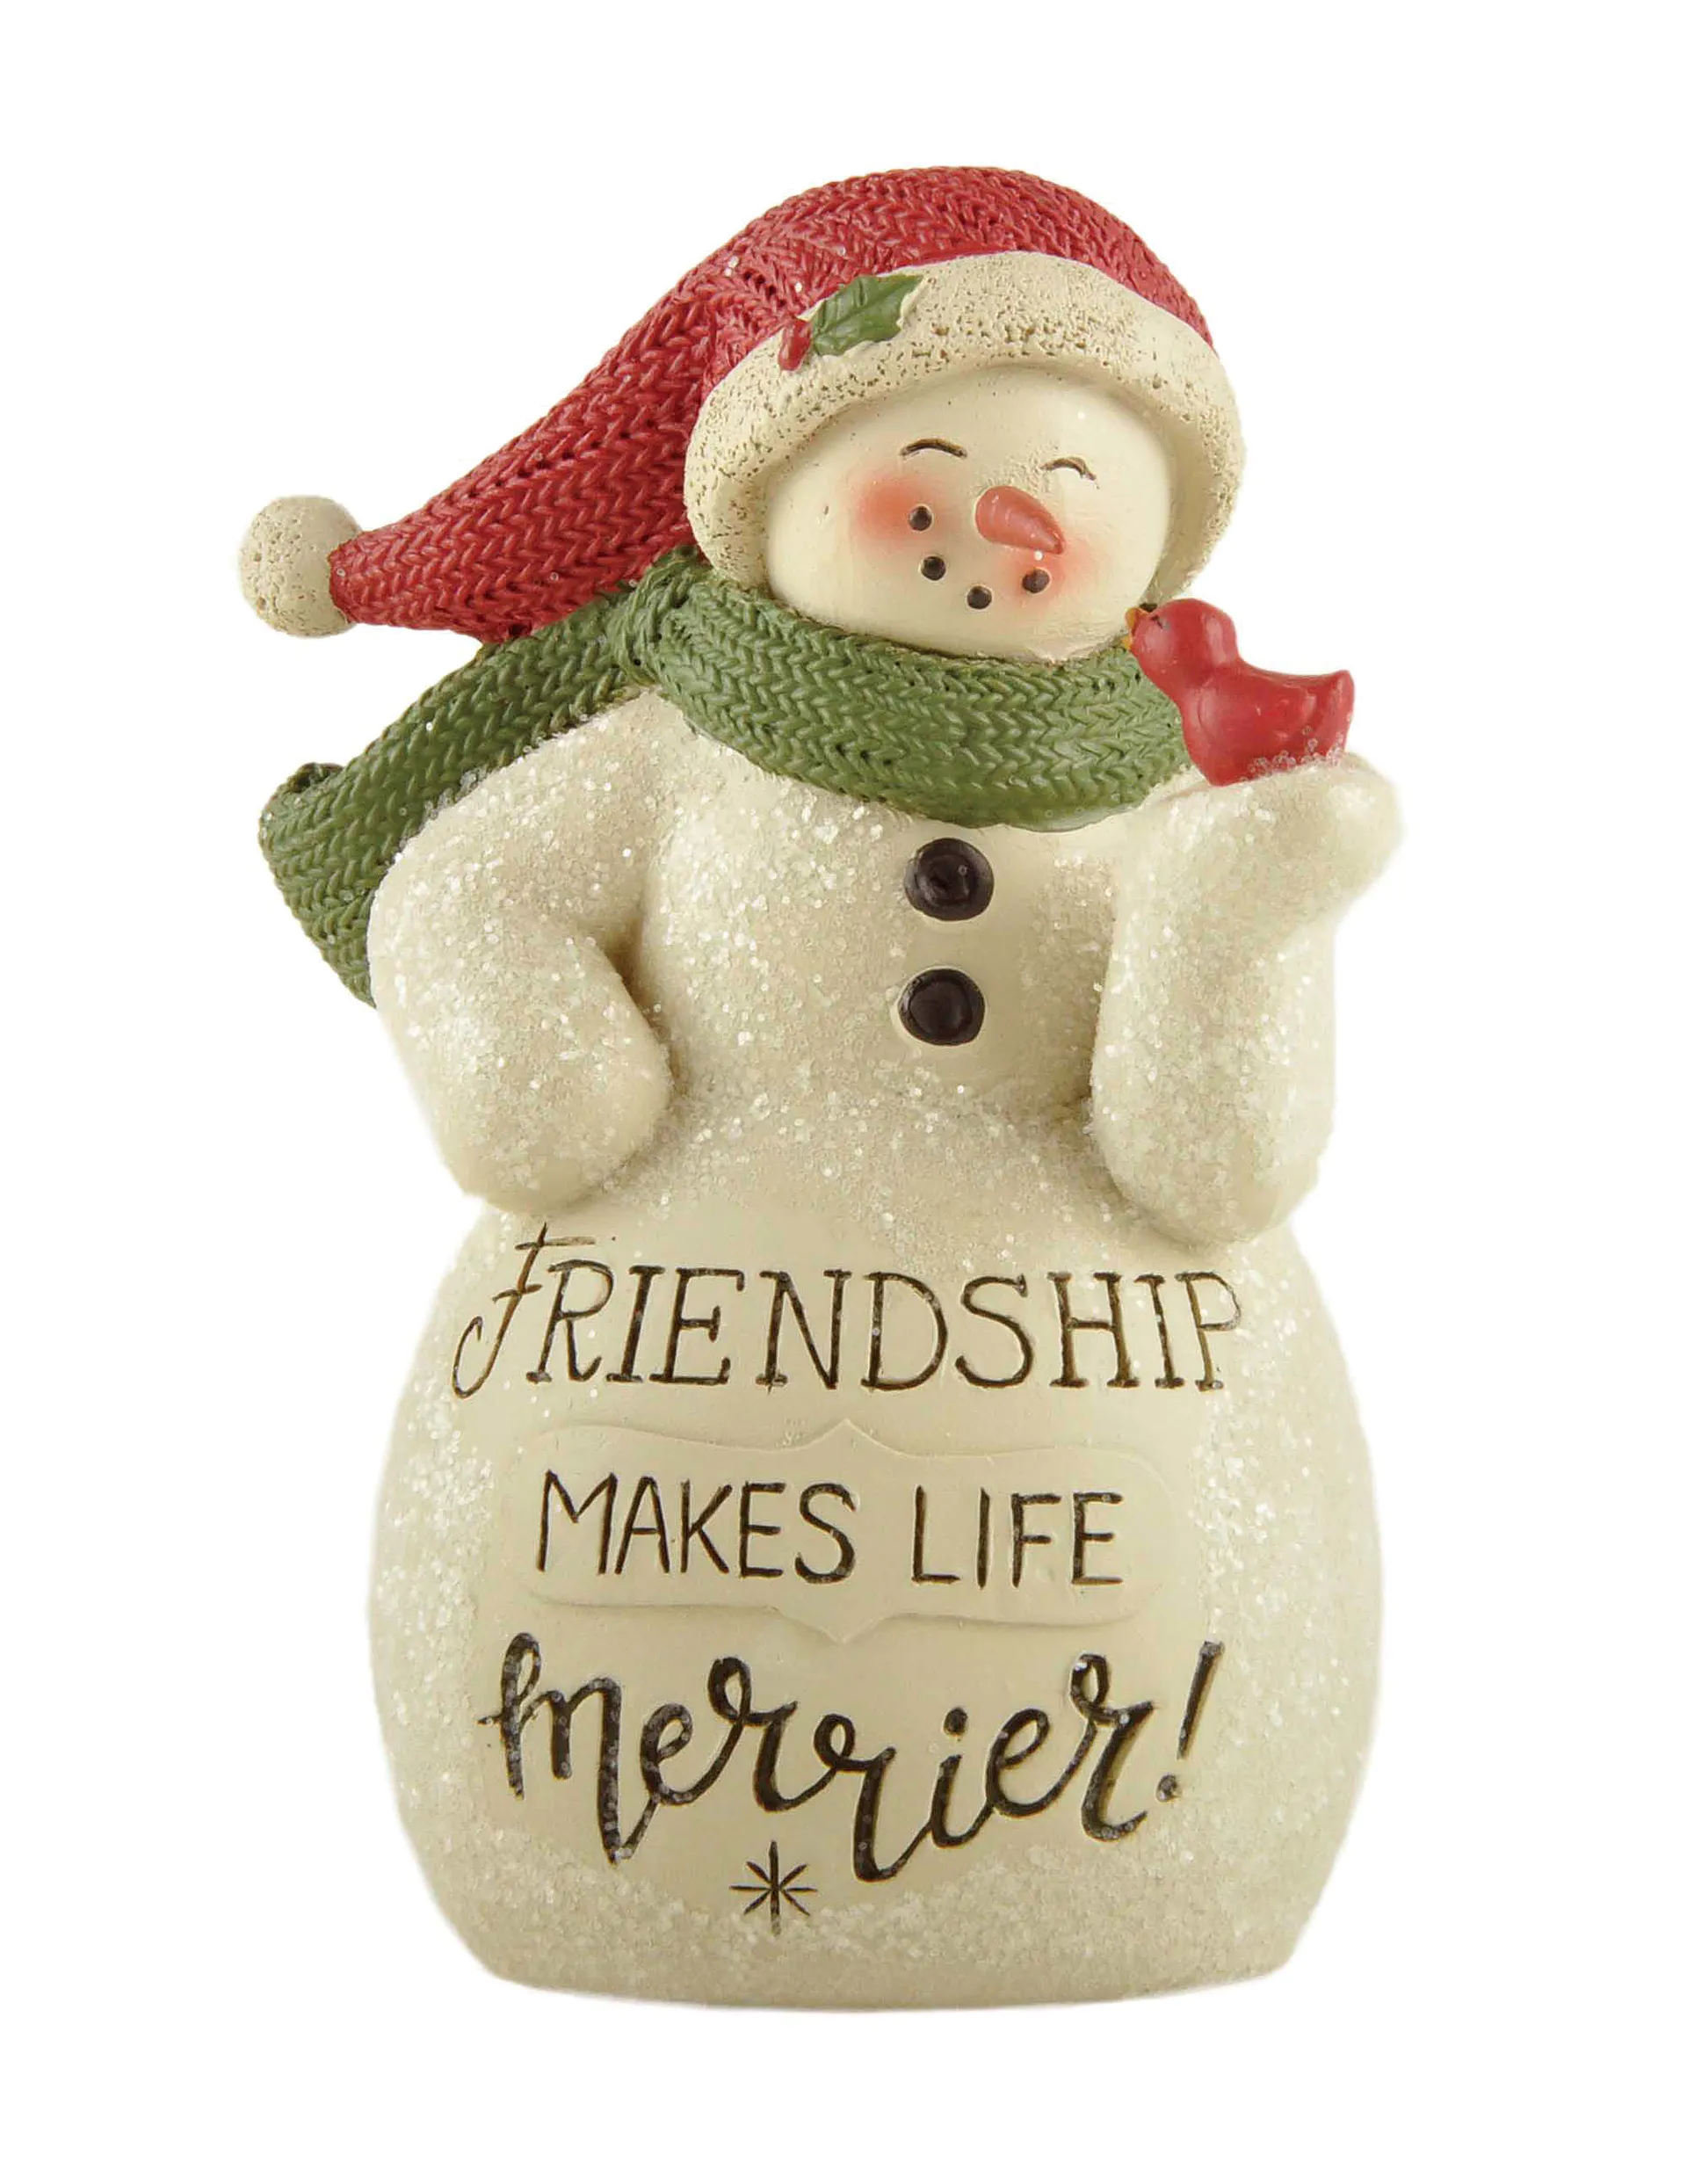 Delightful Friendship Makes Life Merrier Snowman Figurine with Santa Hat and Green Scarf for Holiday Decoration 238-13794